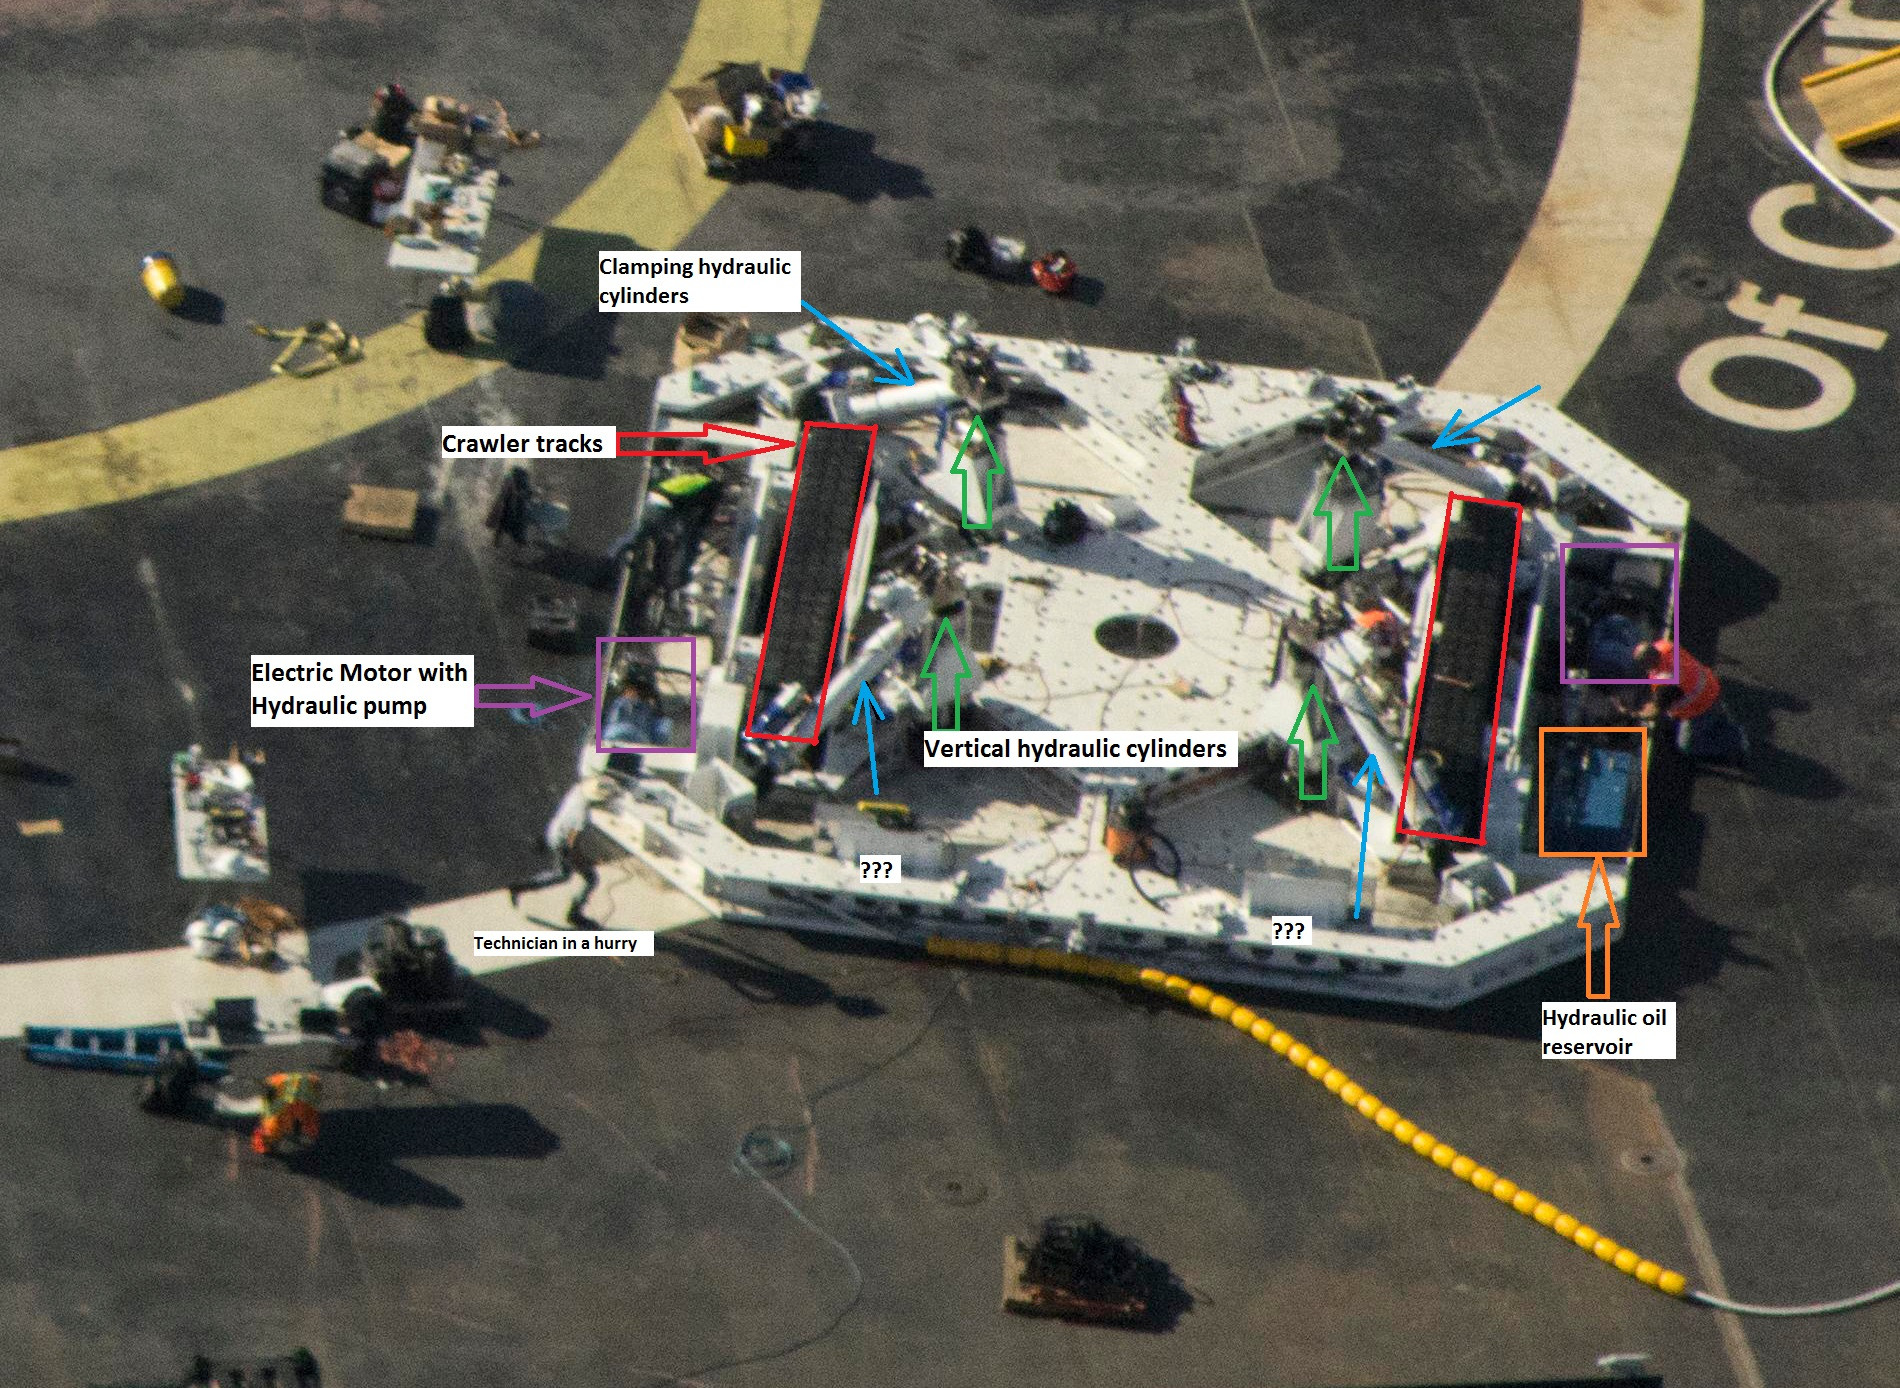 SpaceX-OCISLY-droneship-robot-annotated